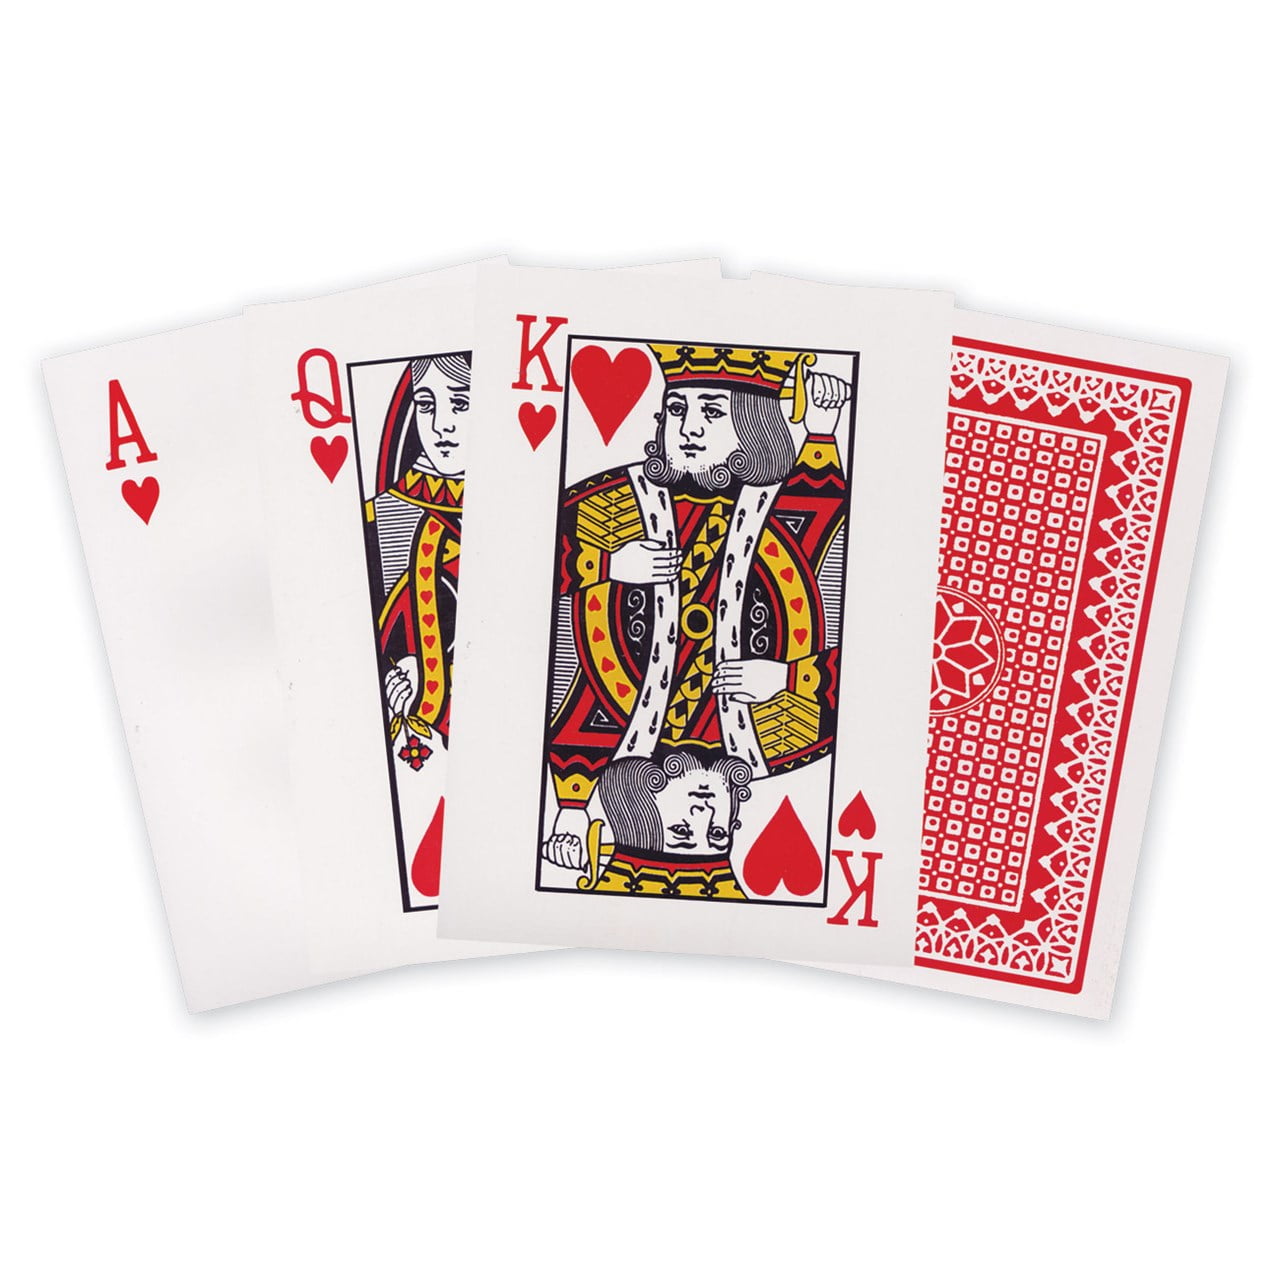 King Size Playing Cards: 10 times the size!